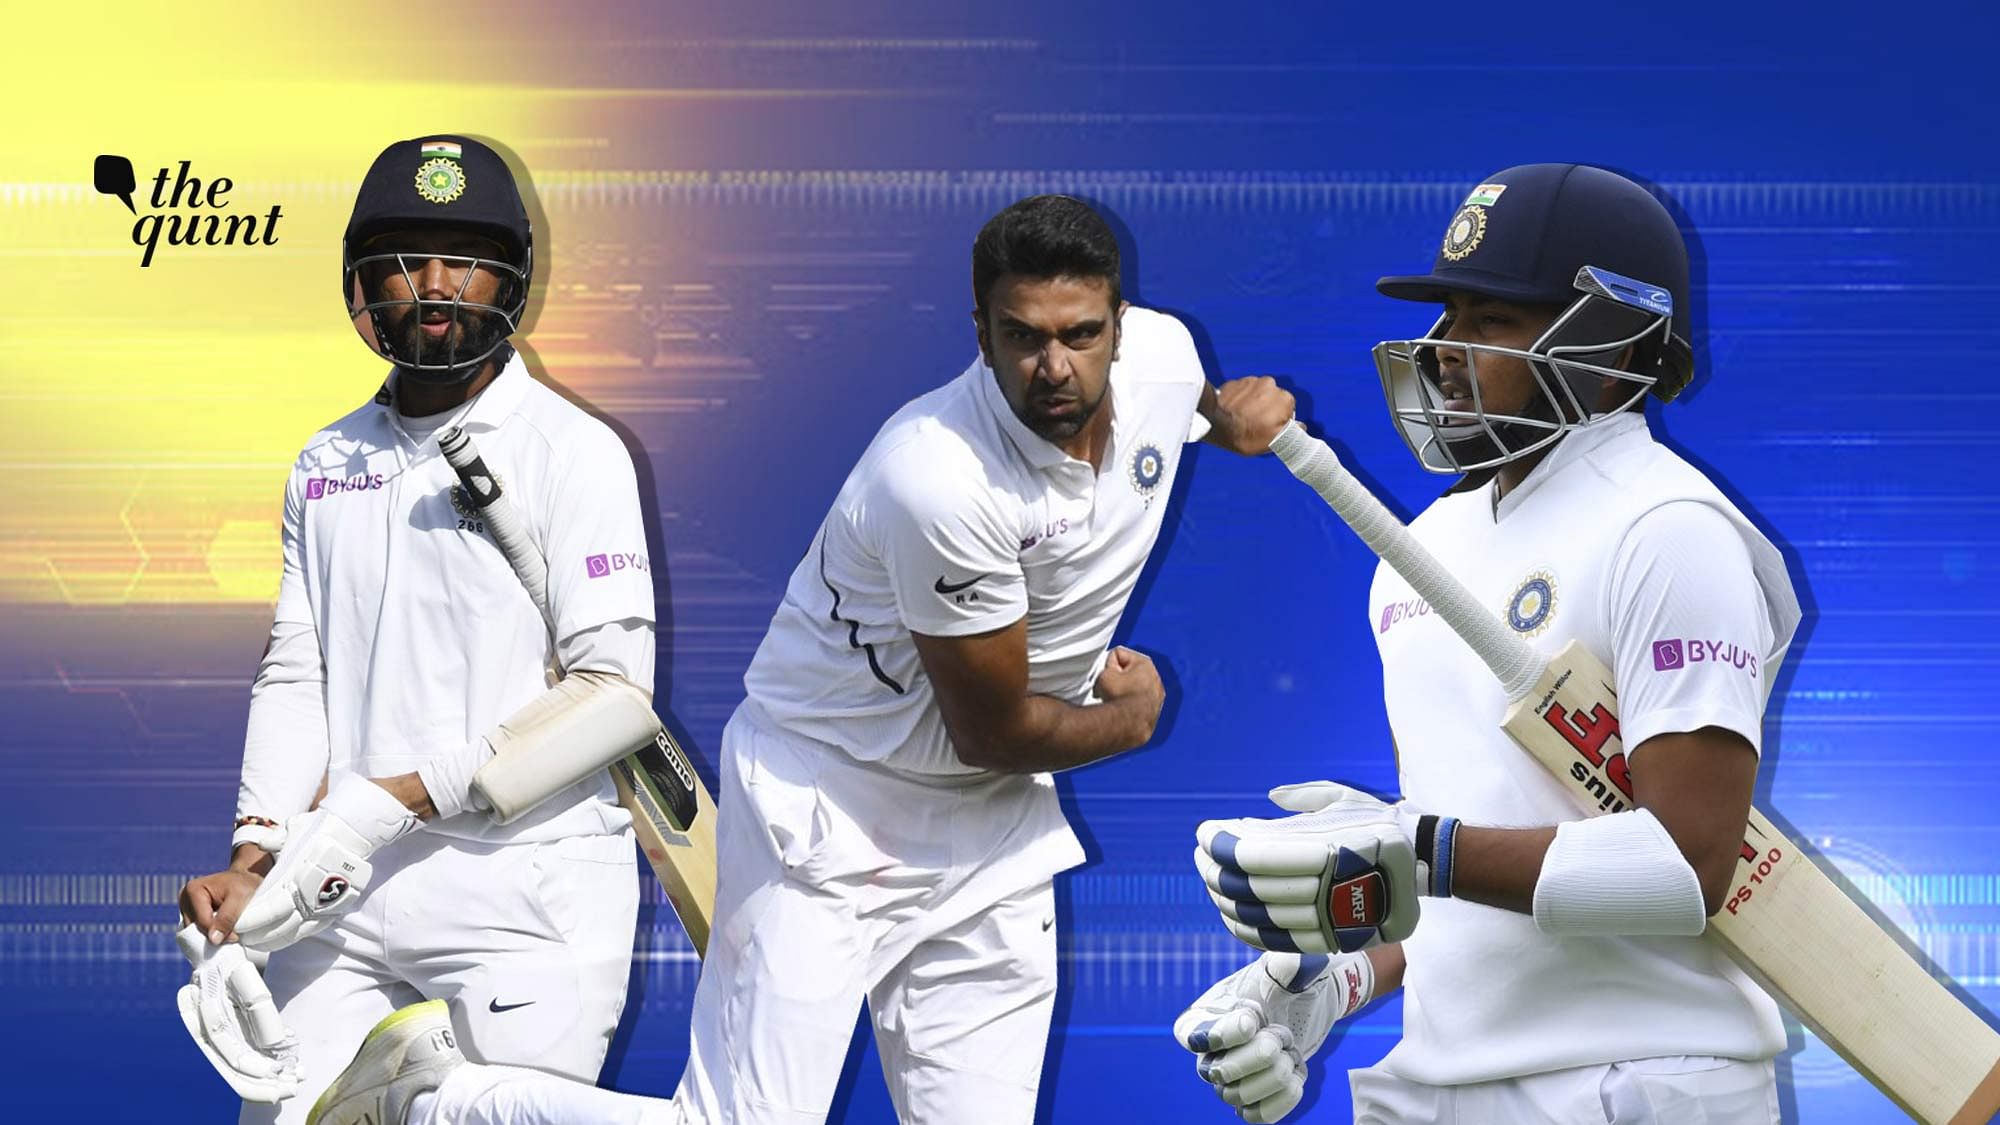 New Zealand beat India be 10 wickets in the first Test in Wellington to take a 1-0 lead in the two-match series.